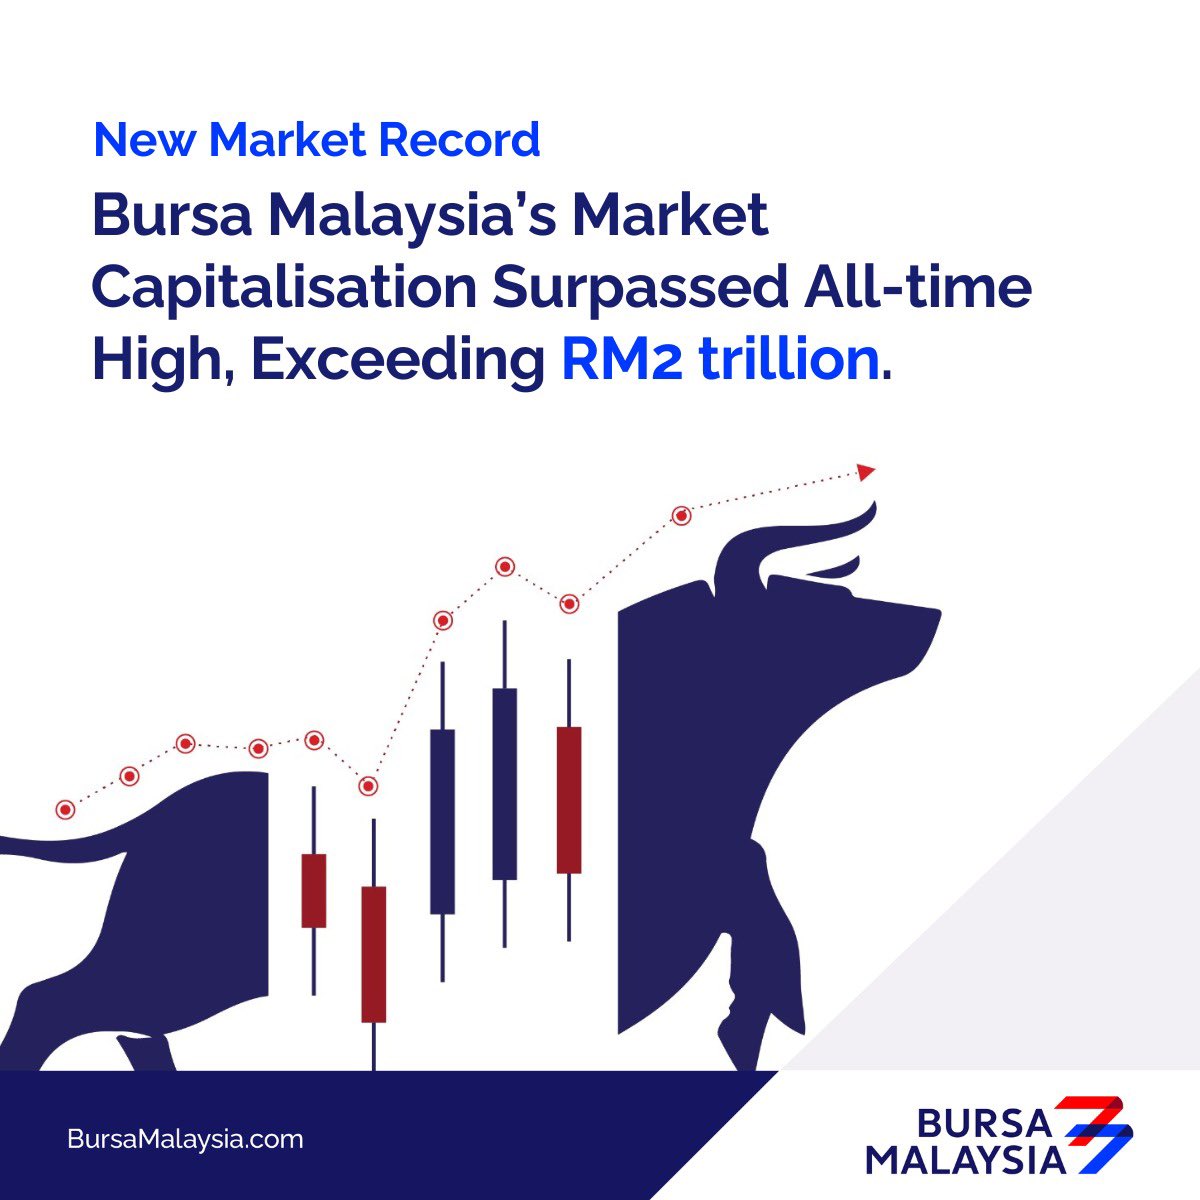 Today, we chart a new record on Bursa Malaysia 📈 Our equities market capitalisation has skyrocketed to a record high of more than RM2 trillion! 🚀 This morning, the benchmark index [FBM KLCI] also soared past 1,600 points for the first time in 2 years. [1/2]